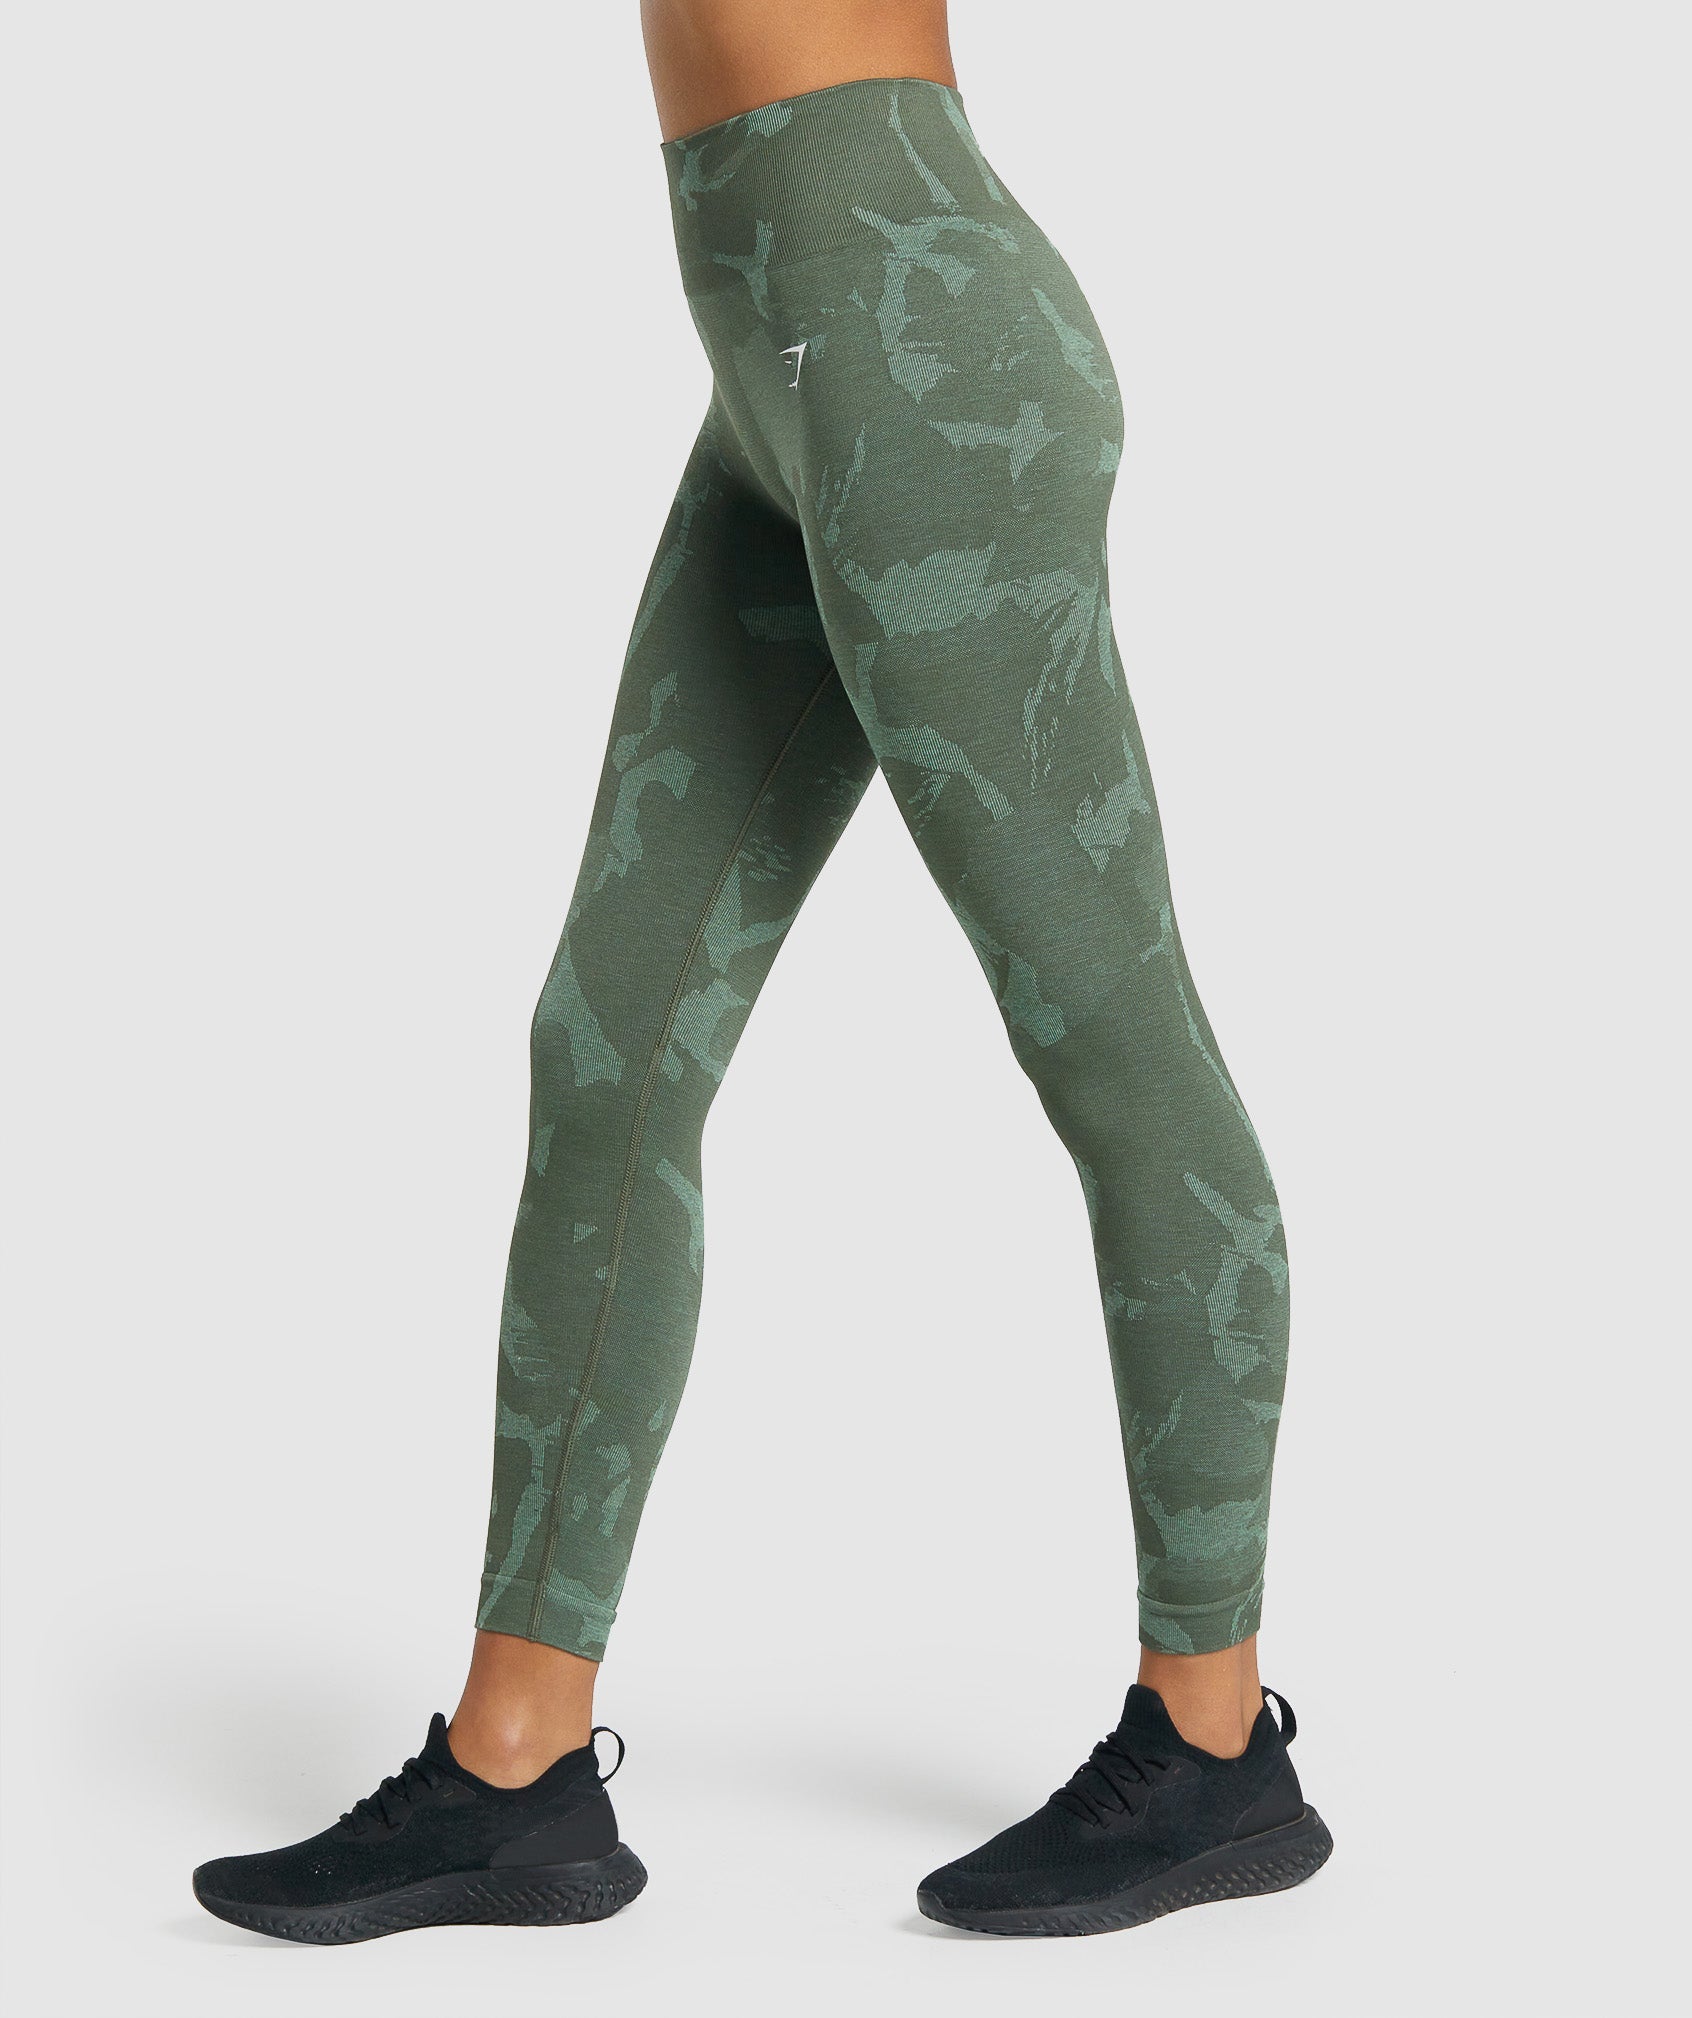 Gymshark Adapt Camo Leggings Green - $36 (28% Off Retail) - From